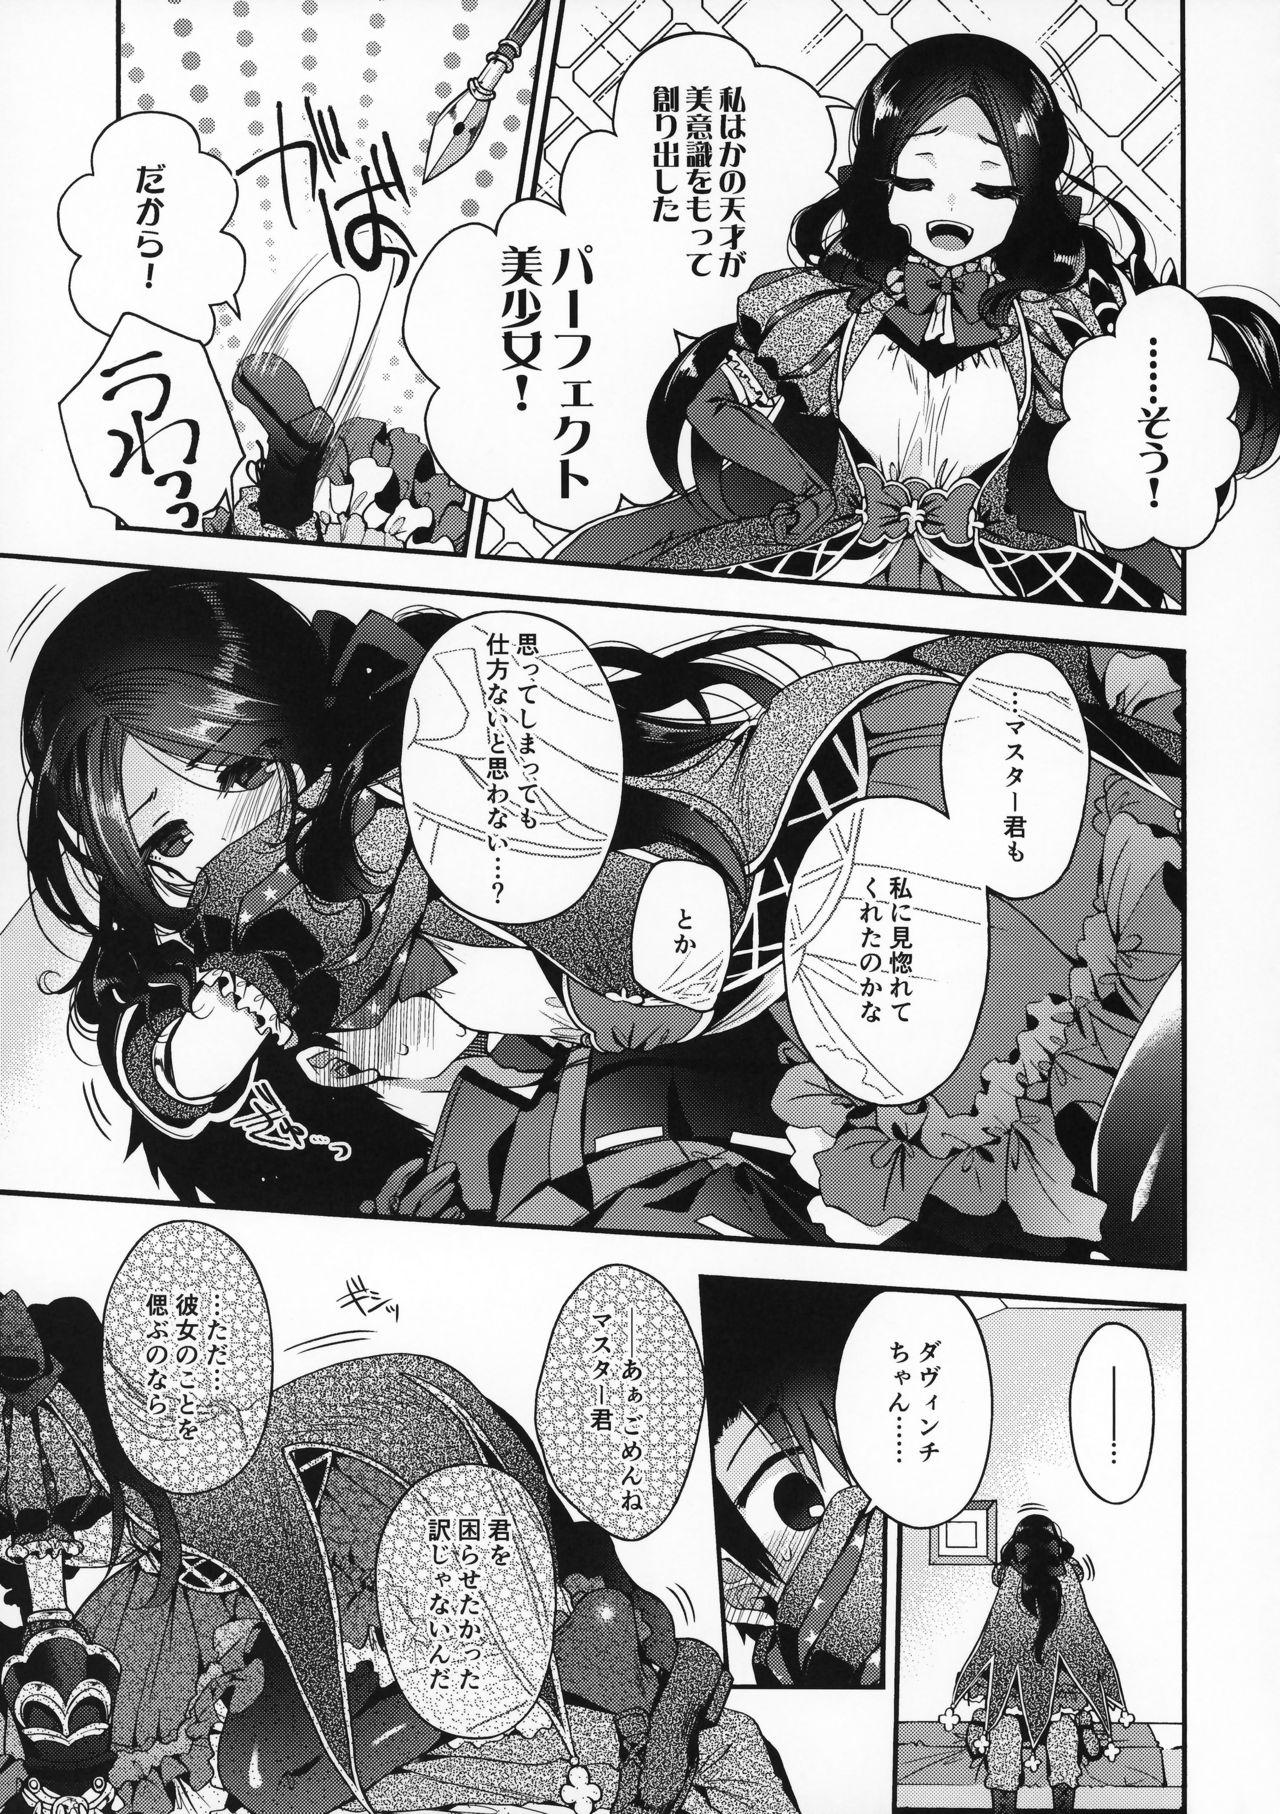 Tributo Peropero Rinch-chan!!! - Fate grand order Sixtynine - Page 4